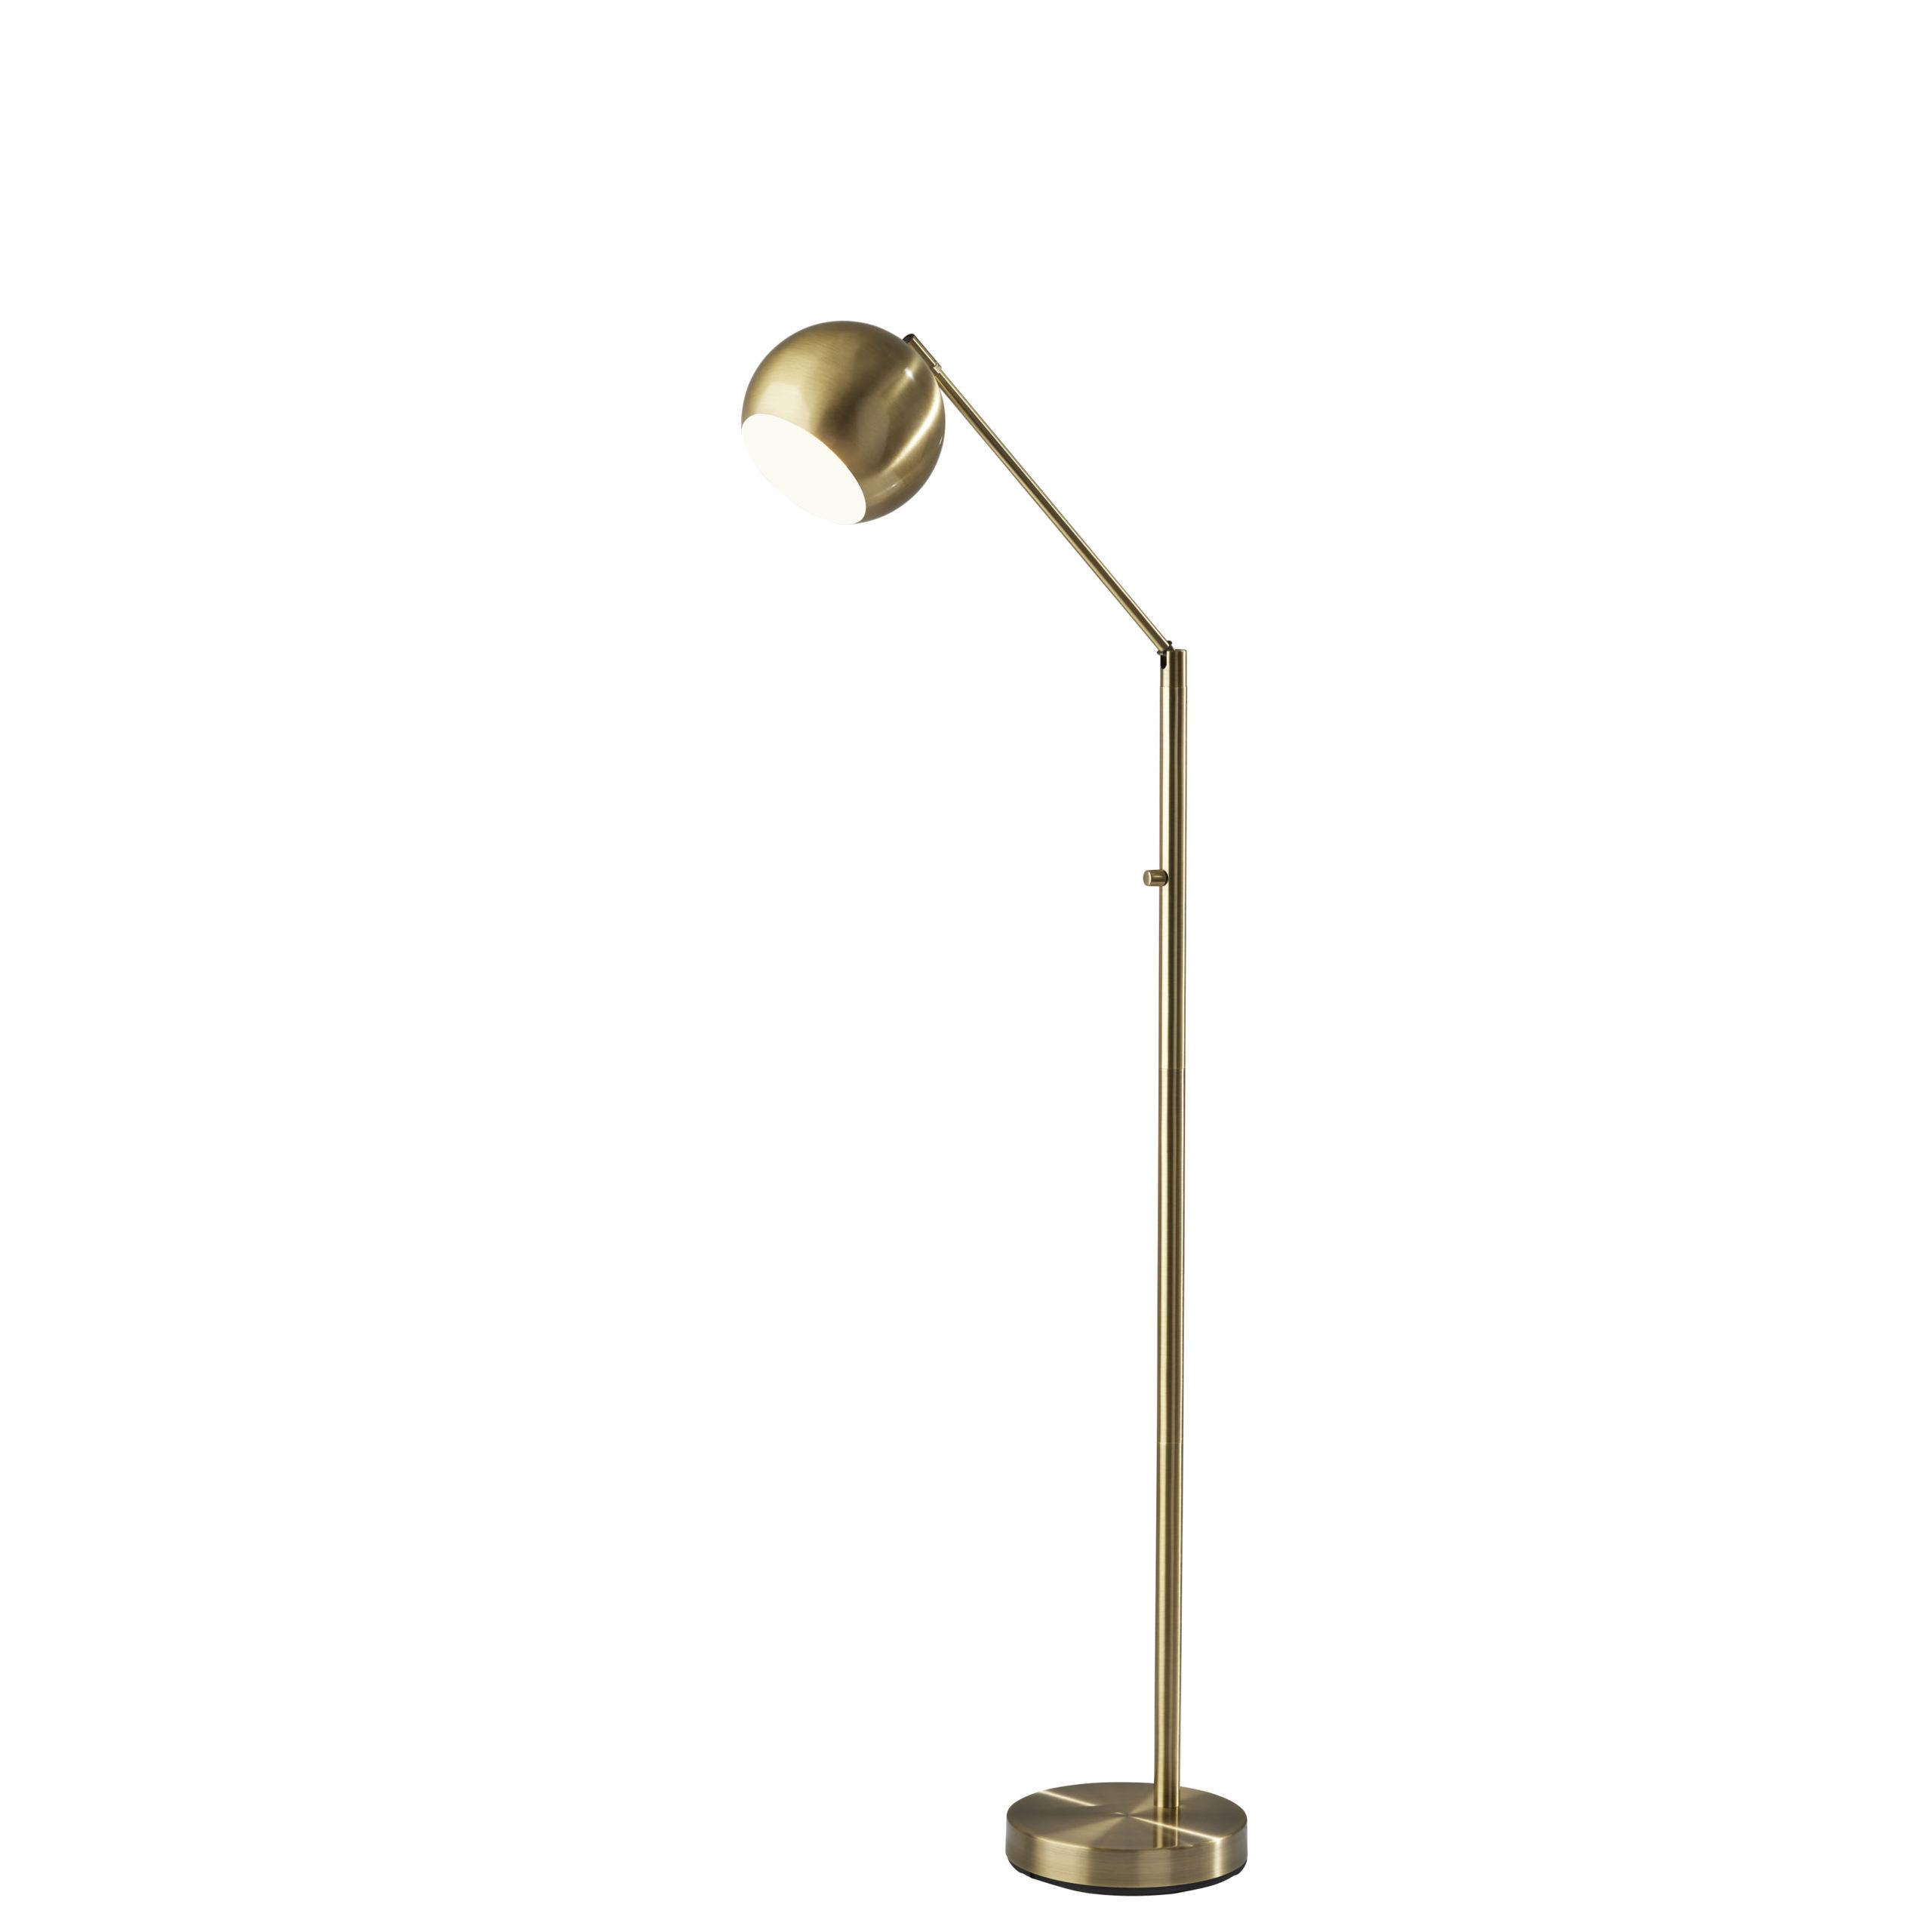 Ashbury Antique Brass Floor Lamp by Adesso Furniture